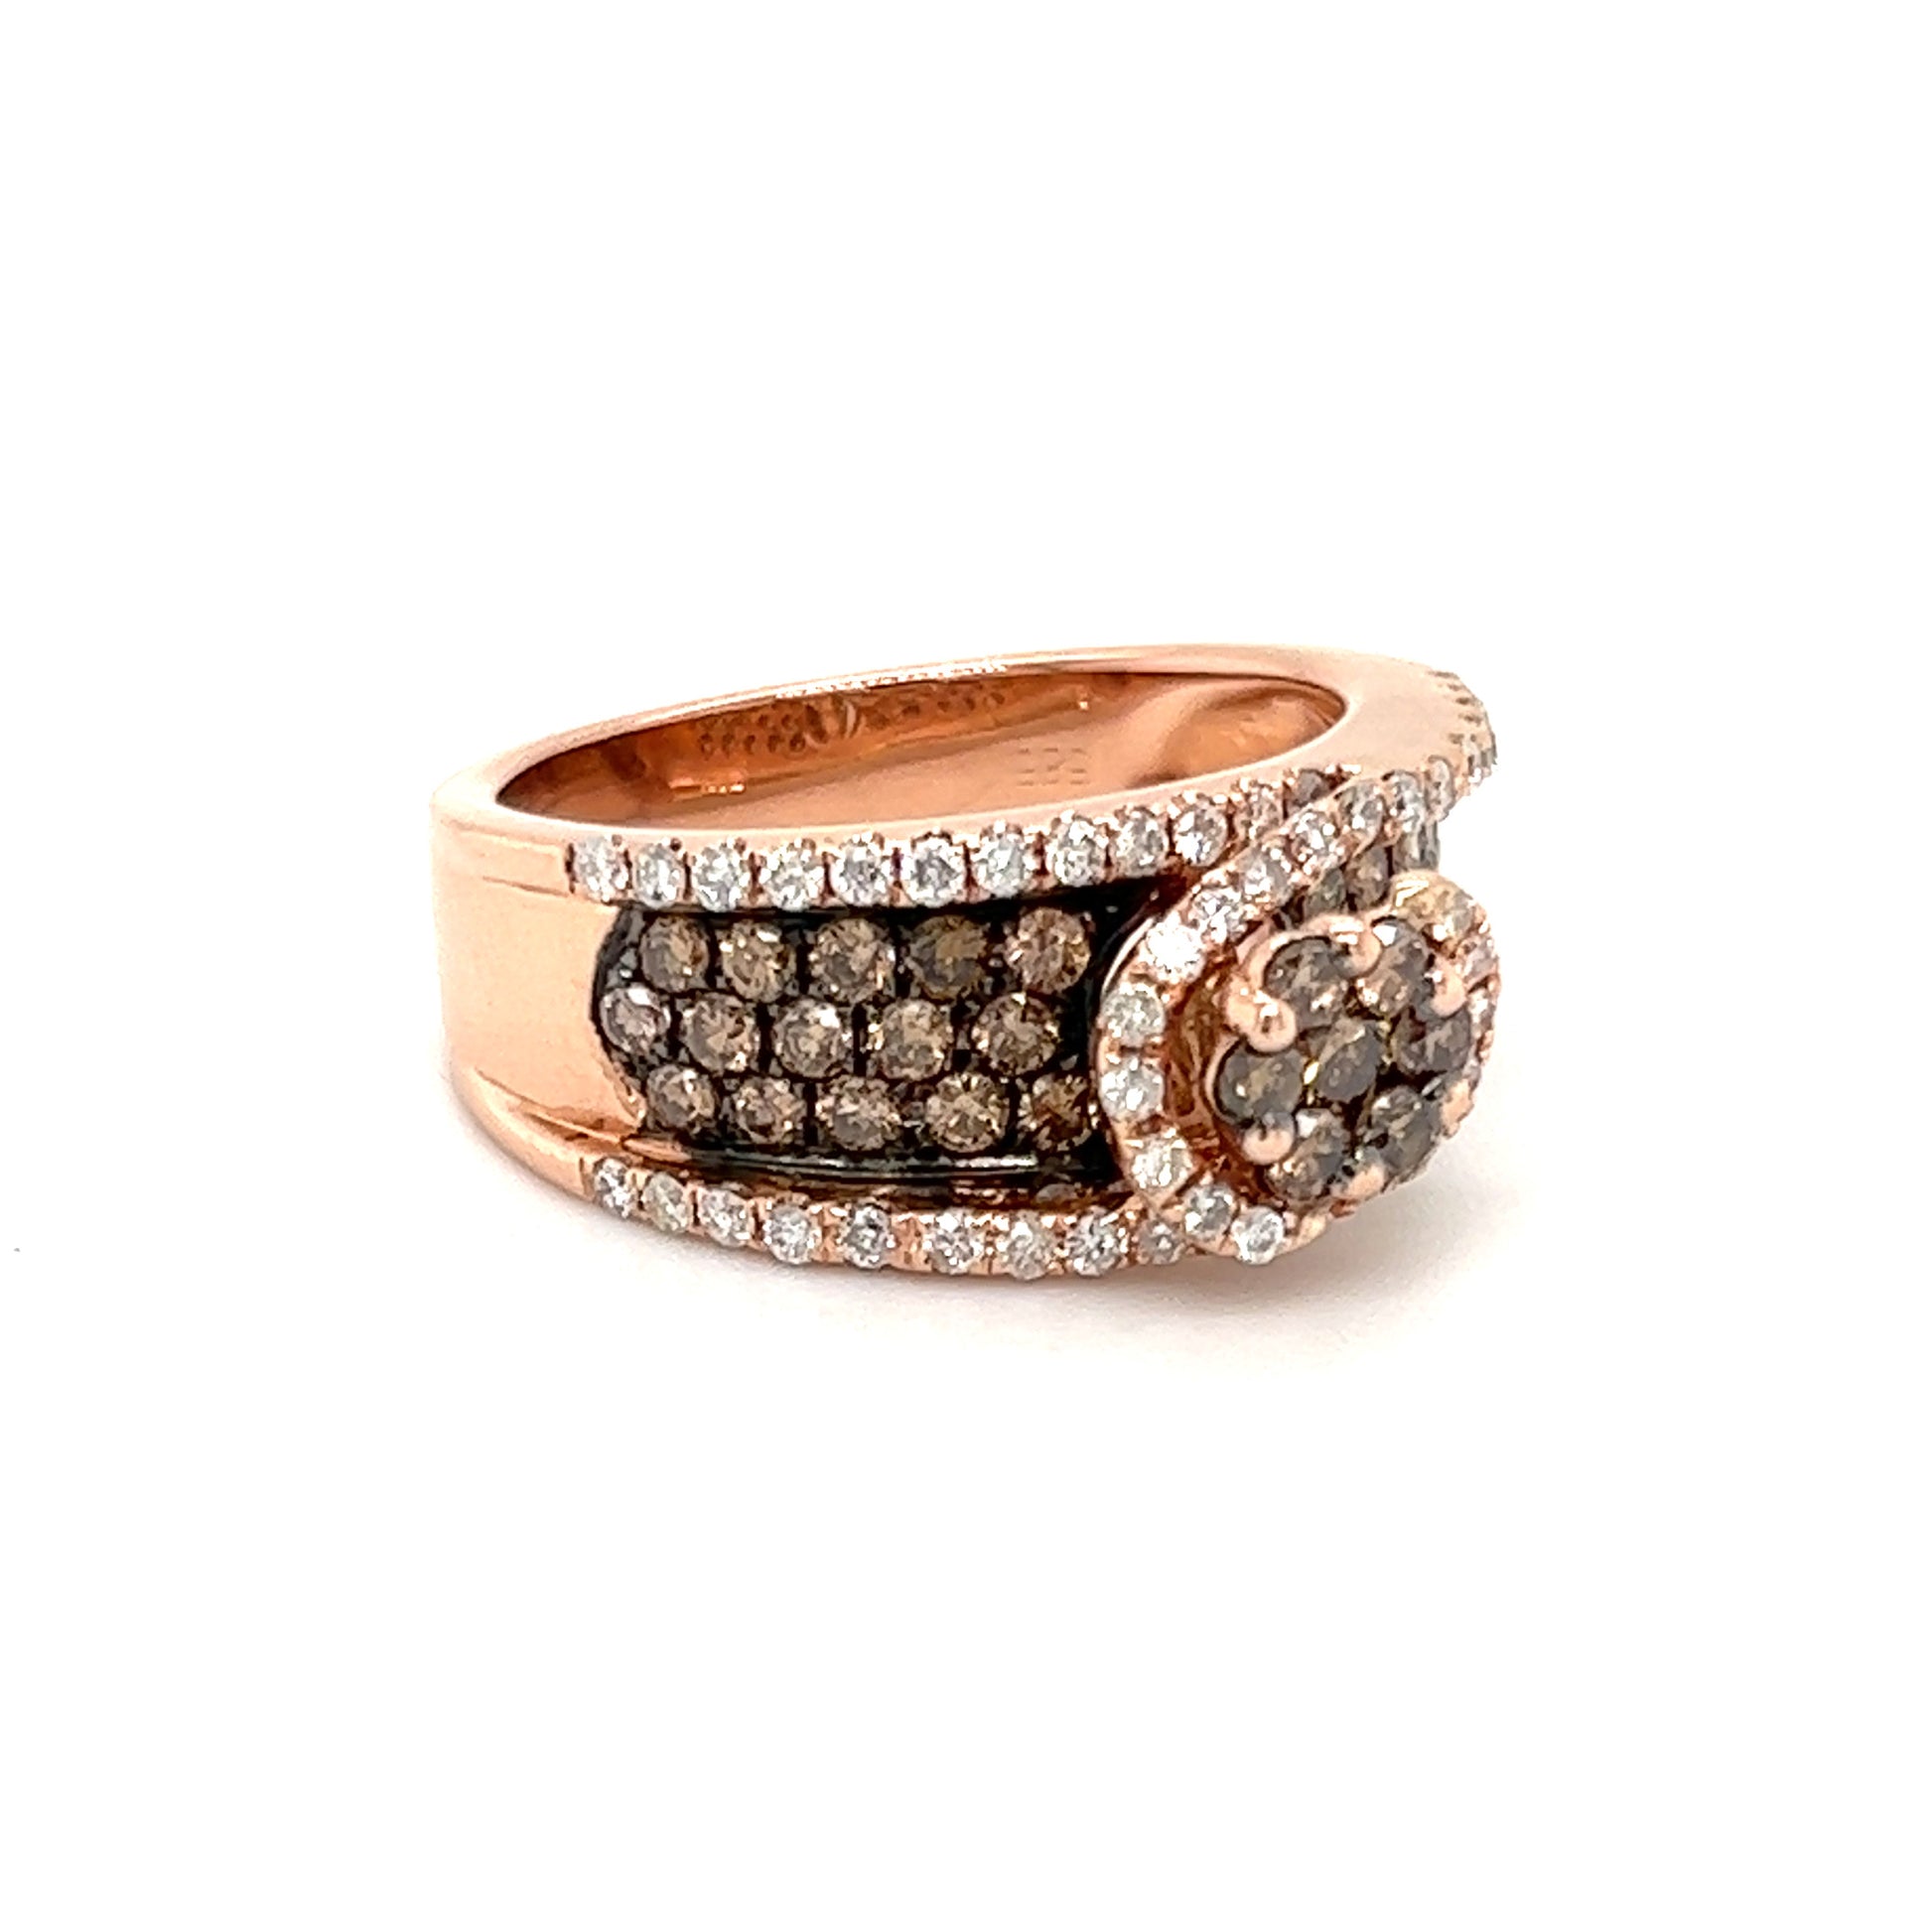 Cognac Diamond Crossover with Fifty-Six White Diamonds Ring in 14K Rose Gold Left Side View